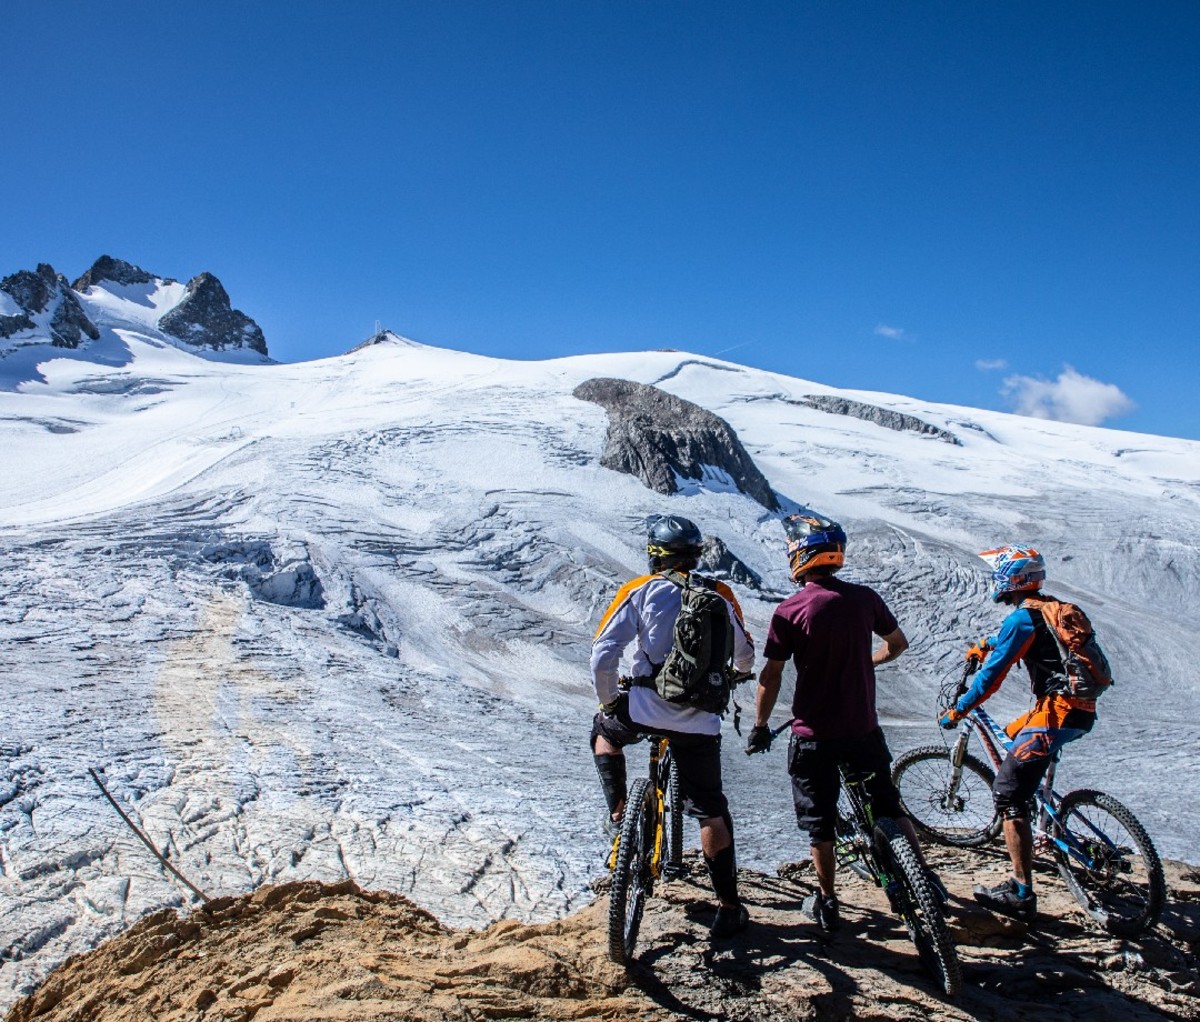 Three mountain bikers on a snowy summit in La Grave, France.